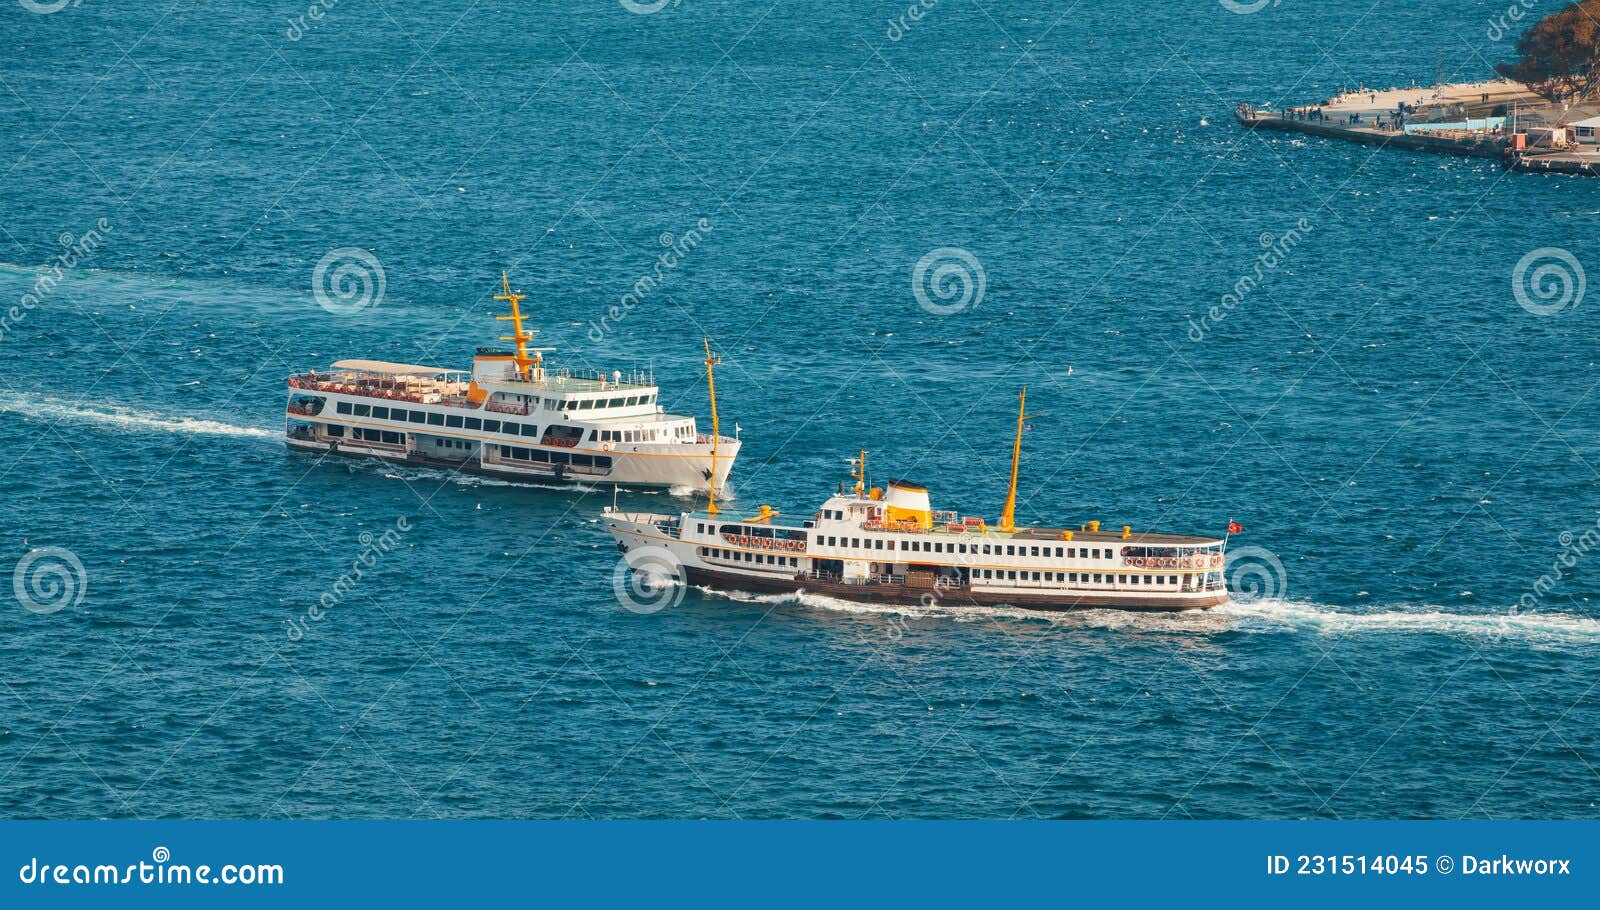 beautiful view of two passenger ferry sailing in the sea and people fishing on a dock in zeytinburnu district